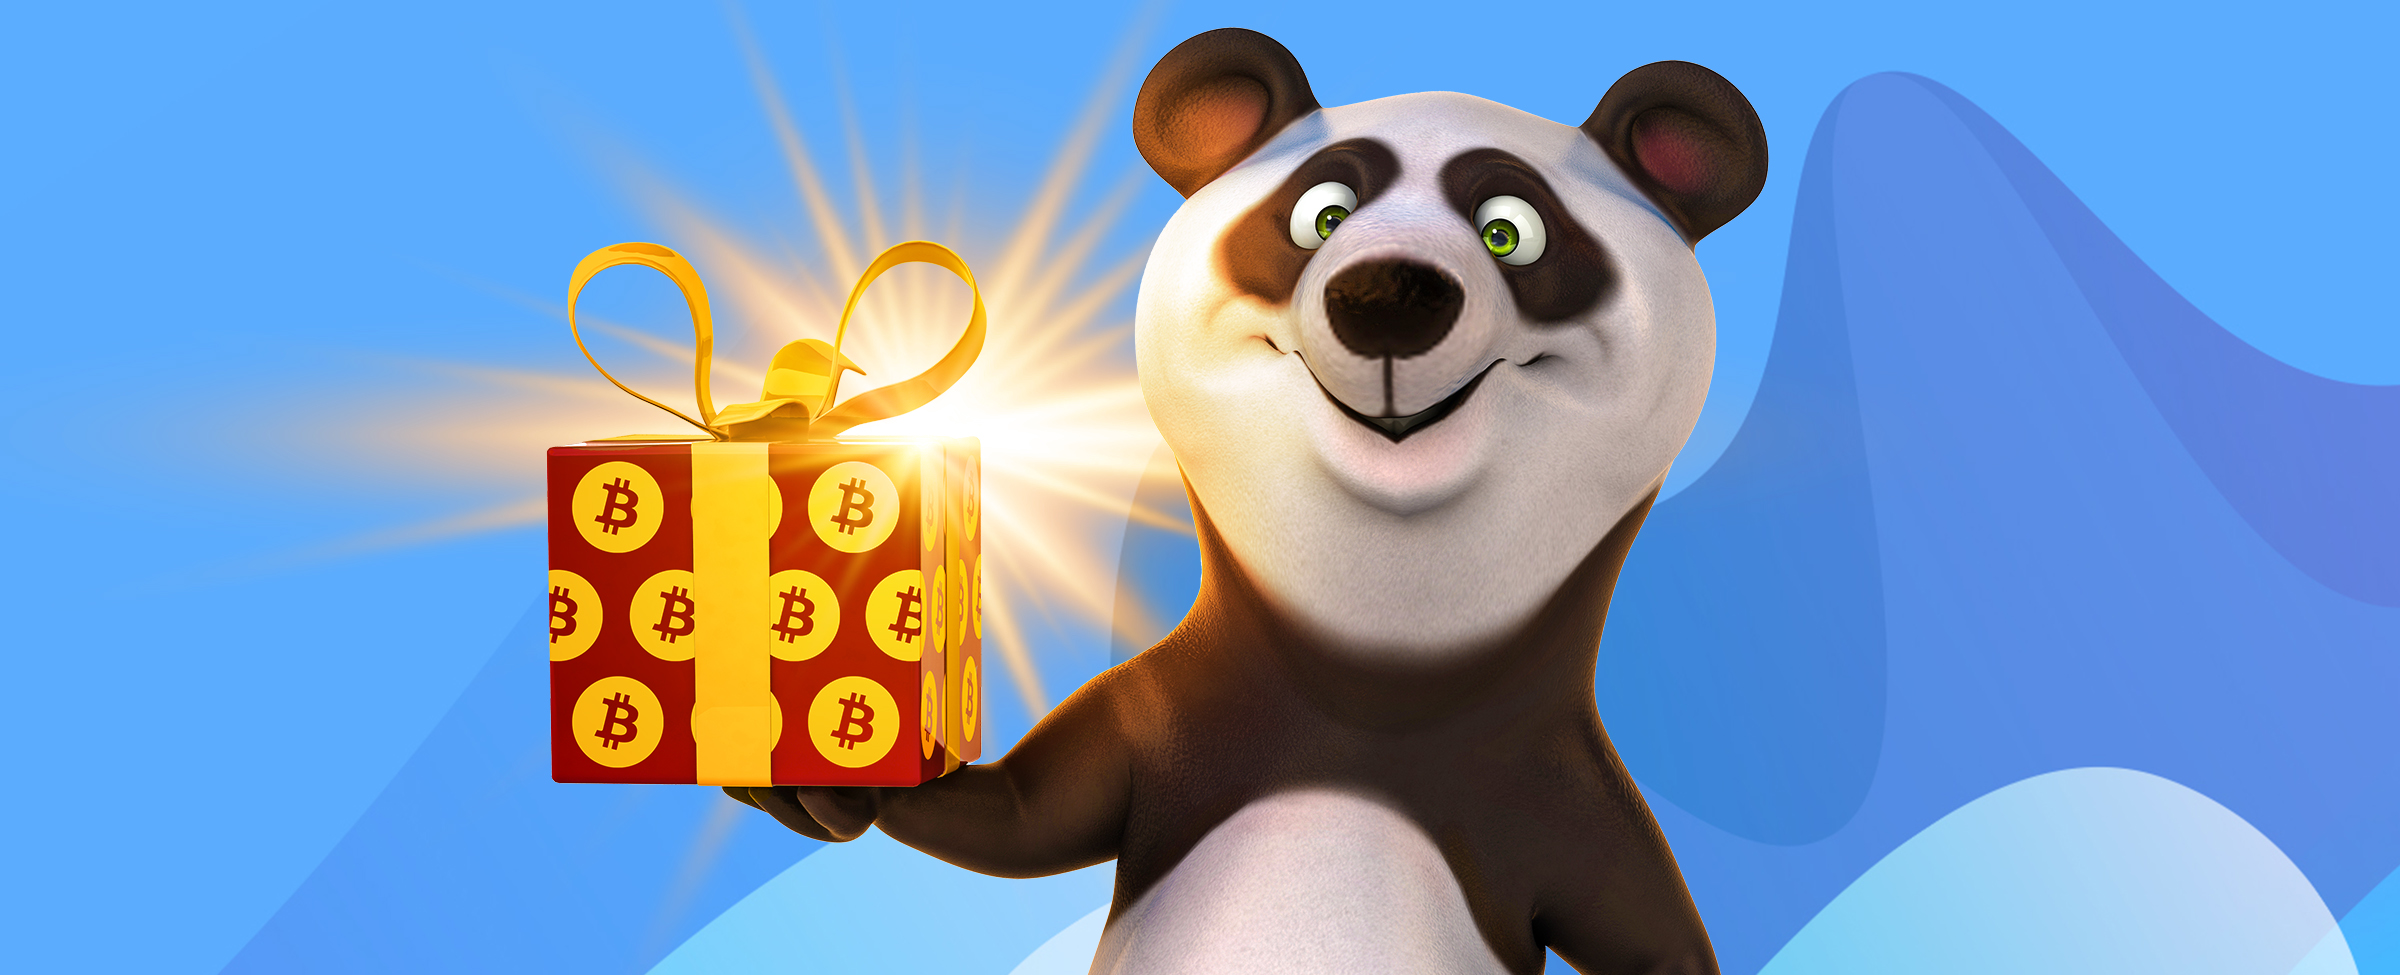 Cartoon character of a panda holding up a gift box with bitcoins printed on the wrapping